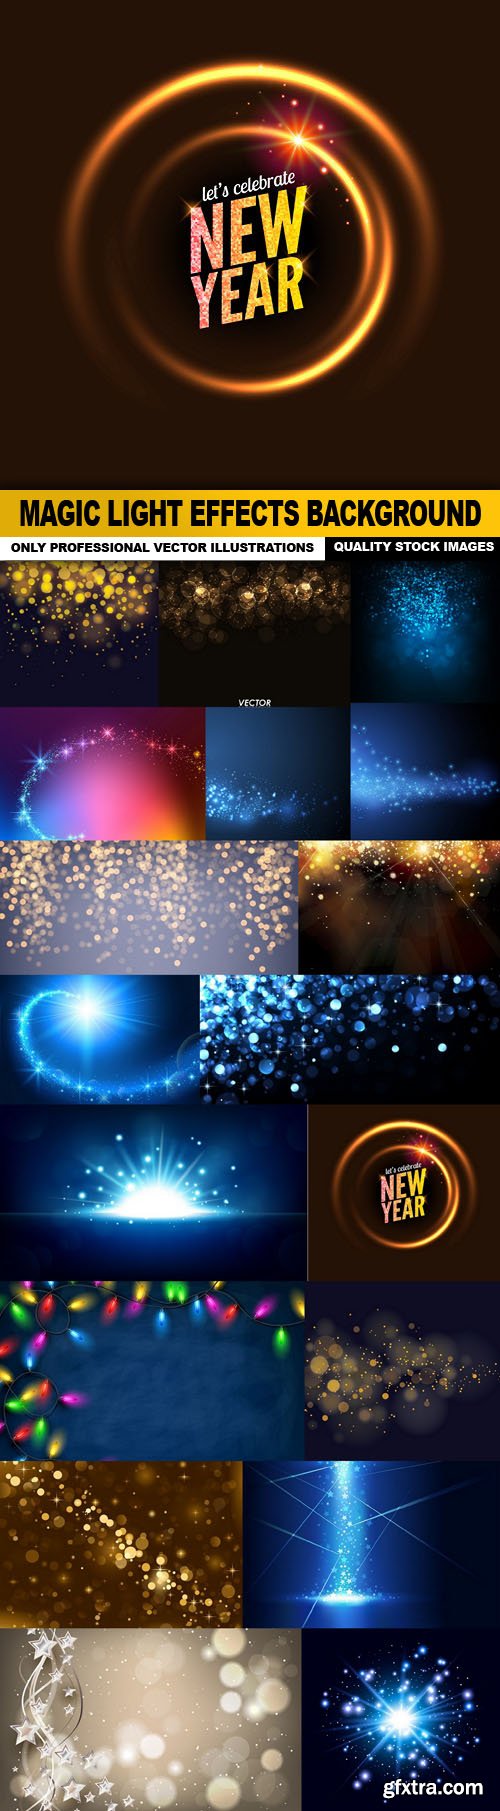 Magic Light Effects Background - 18 Vector